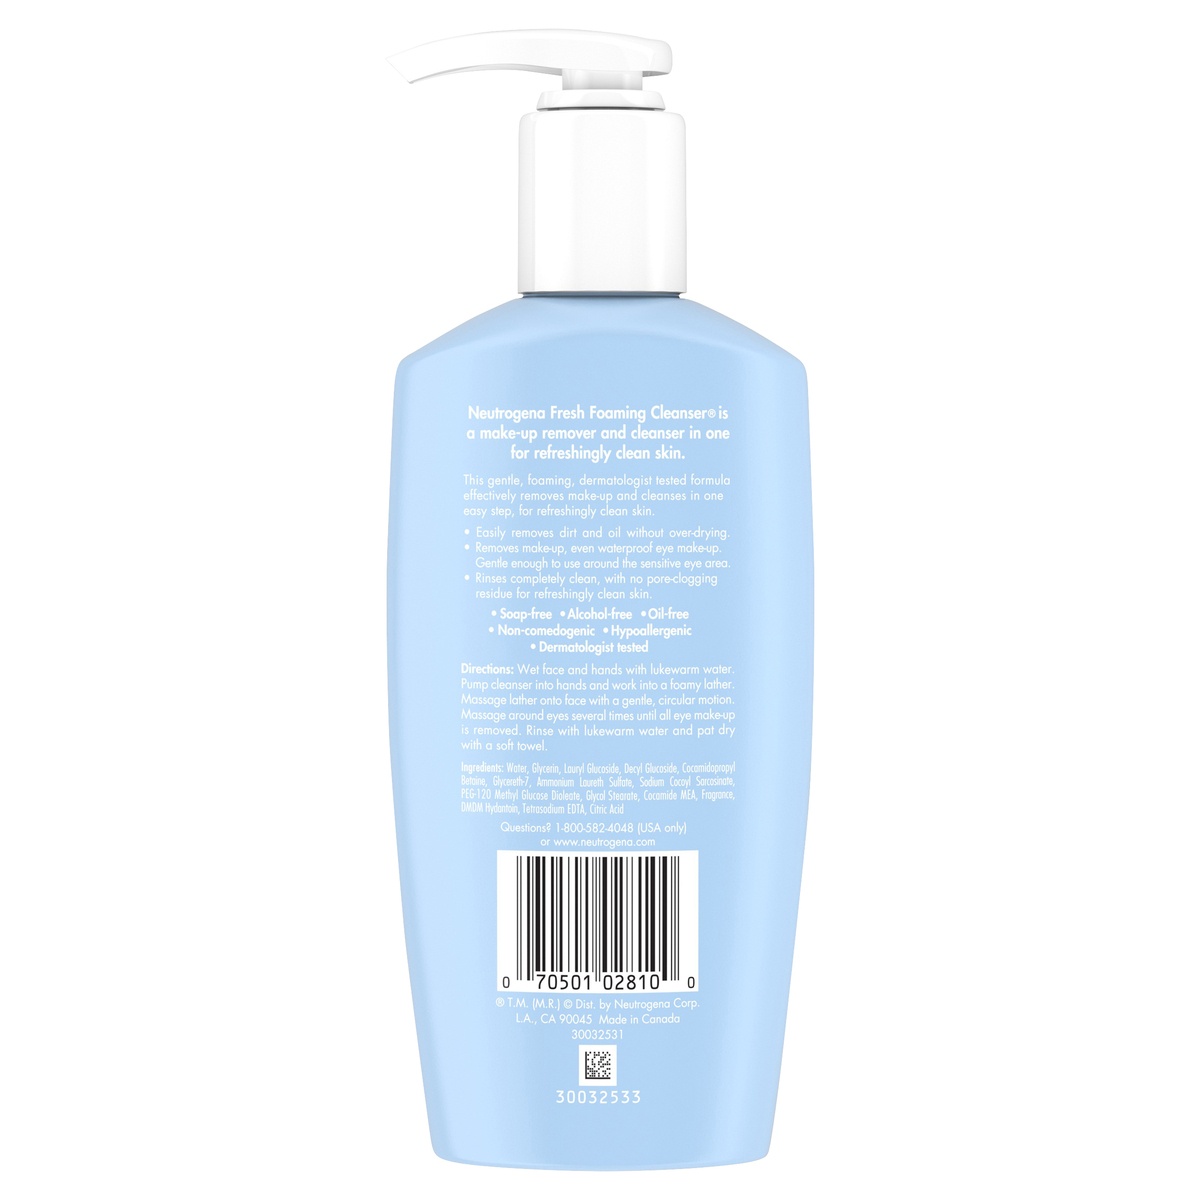 slide 5 of 6, Neutrogena Fresh Foaming Facial Cleanser & Makeup Remover with Glycerin, Oil-, Soap- & Alcohol-Free Daily Face Wash Removes Dirt, Oil & Waterproof Makeup, Non-Comedogenic & Hypoallergenic, 6.7 fl oz